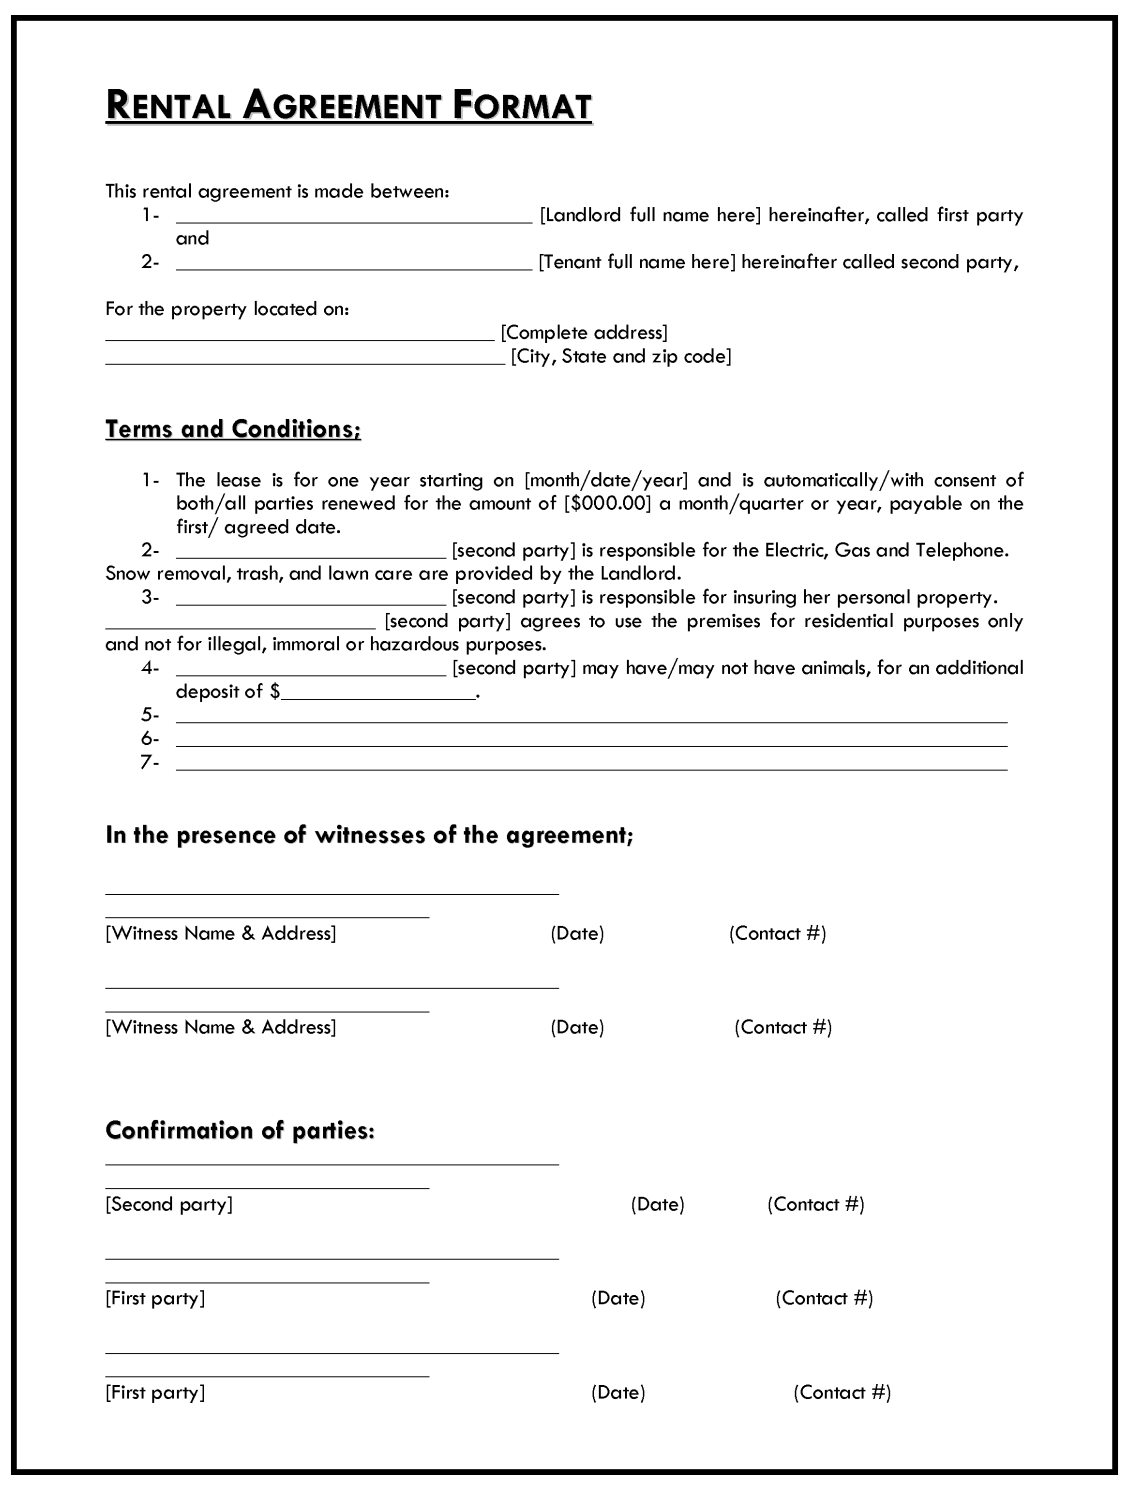 commercial-kitchen-rental-agreement-template